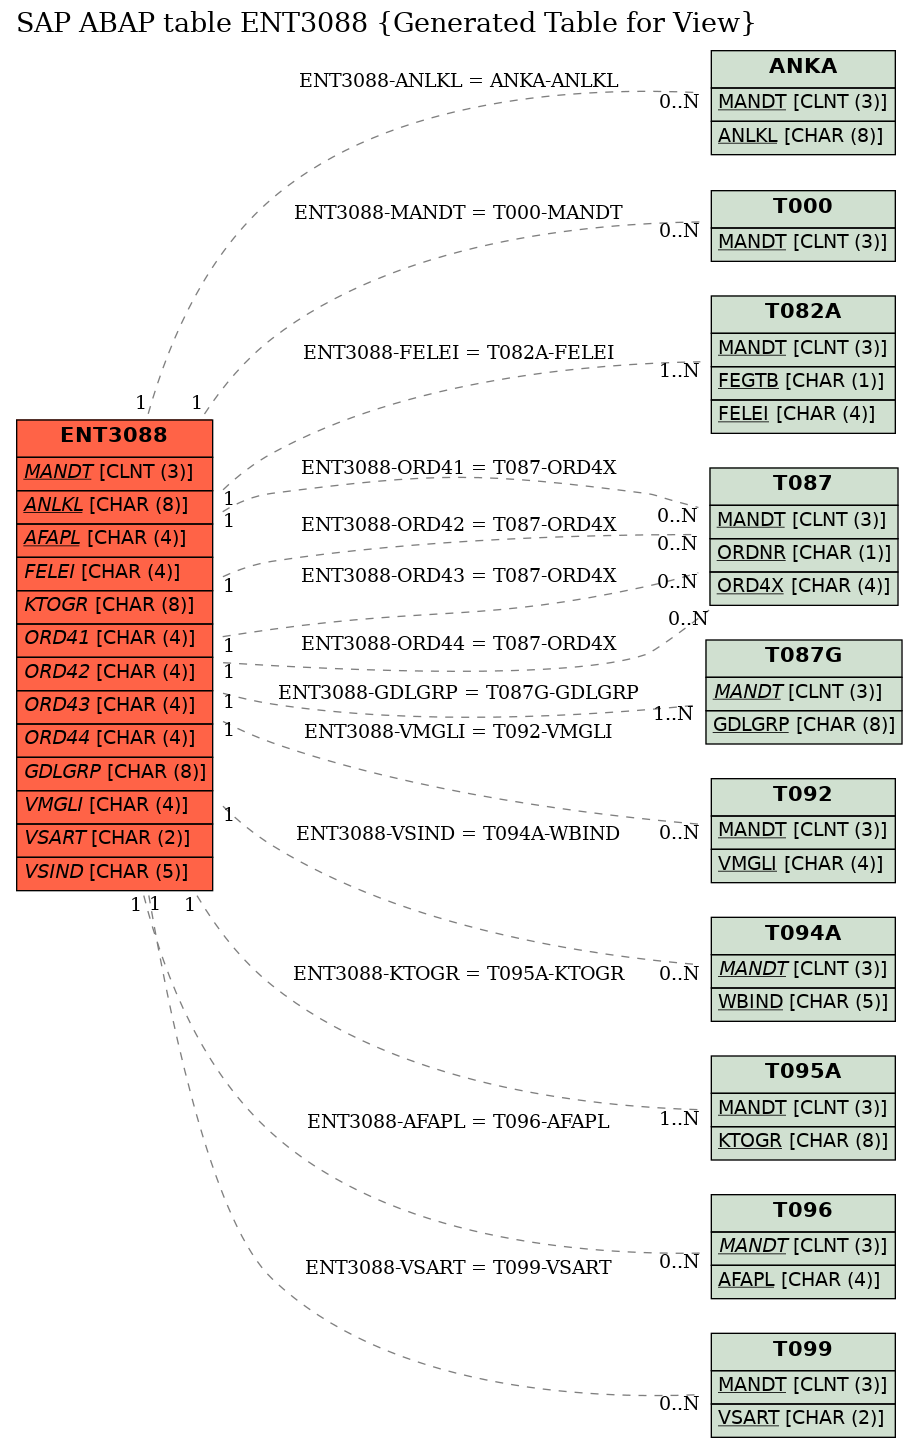 E-R Diagram for table ENT3088 (Generated Table for View)